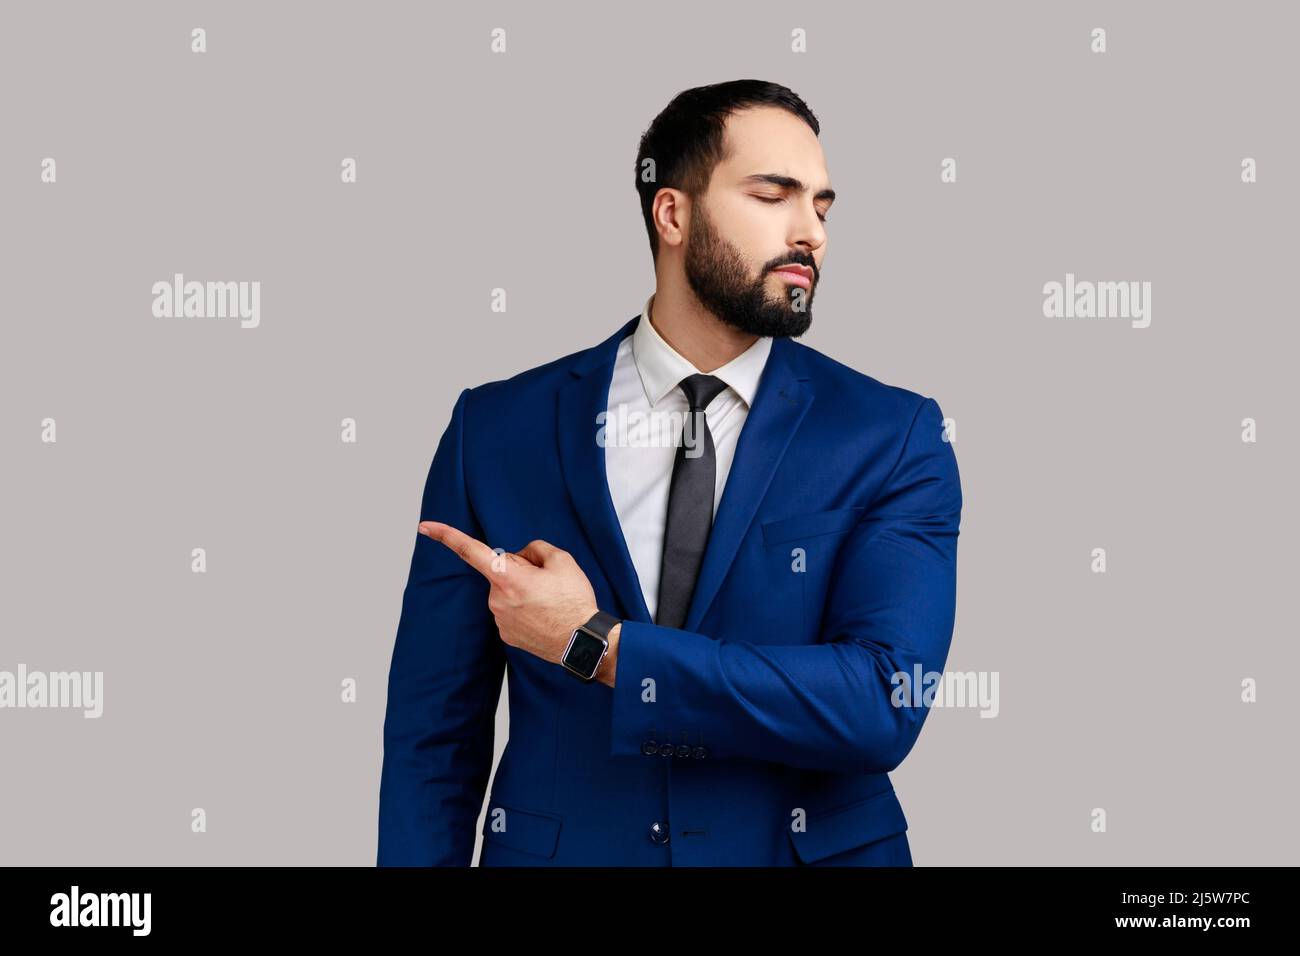 Portrait of bearded man pointing to the side and turning away with angry vexed face, giving order to leave, wearing official style suit. Indoor studio shot isolated on gray background. Stock Photo